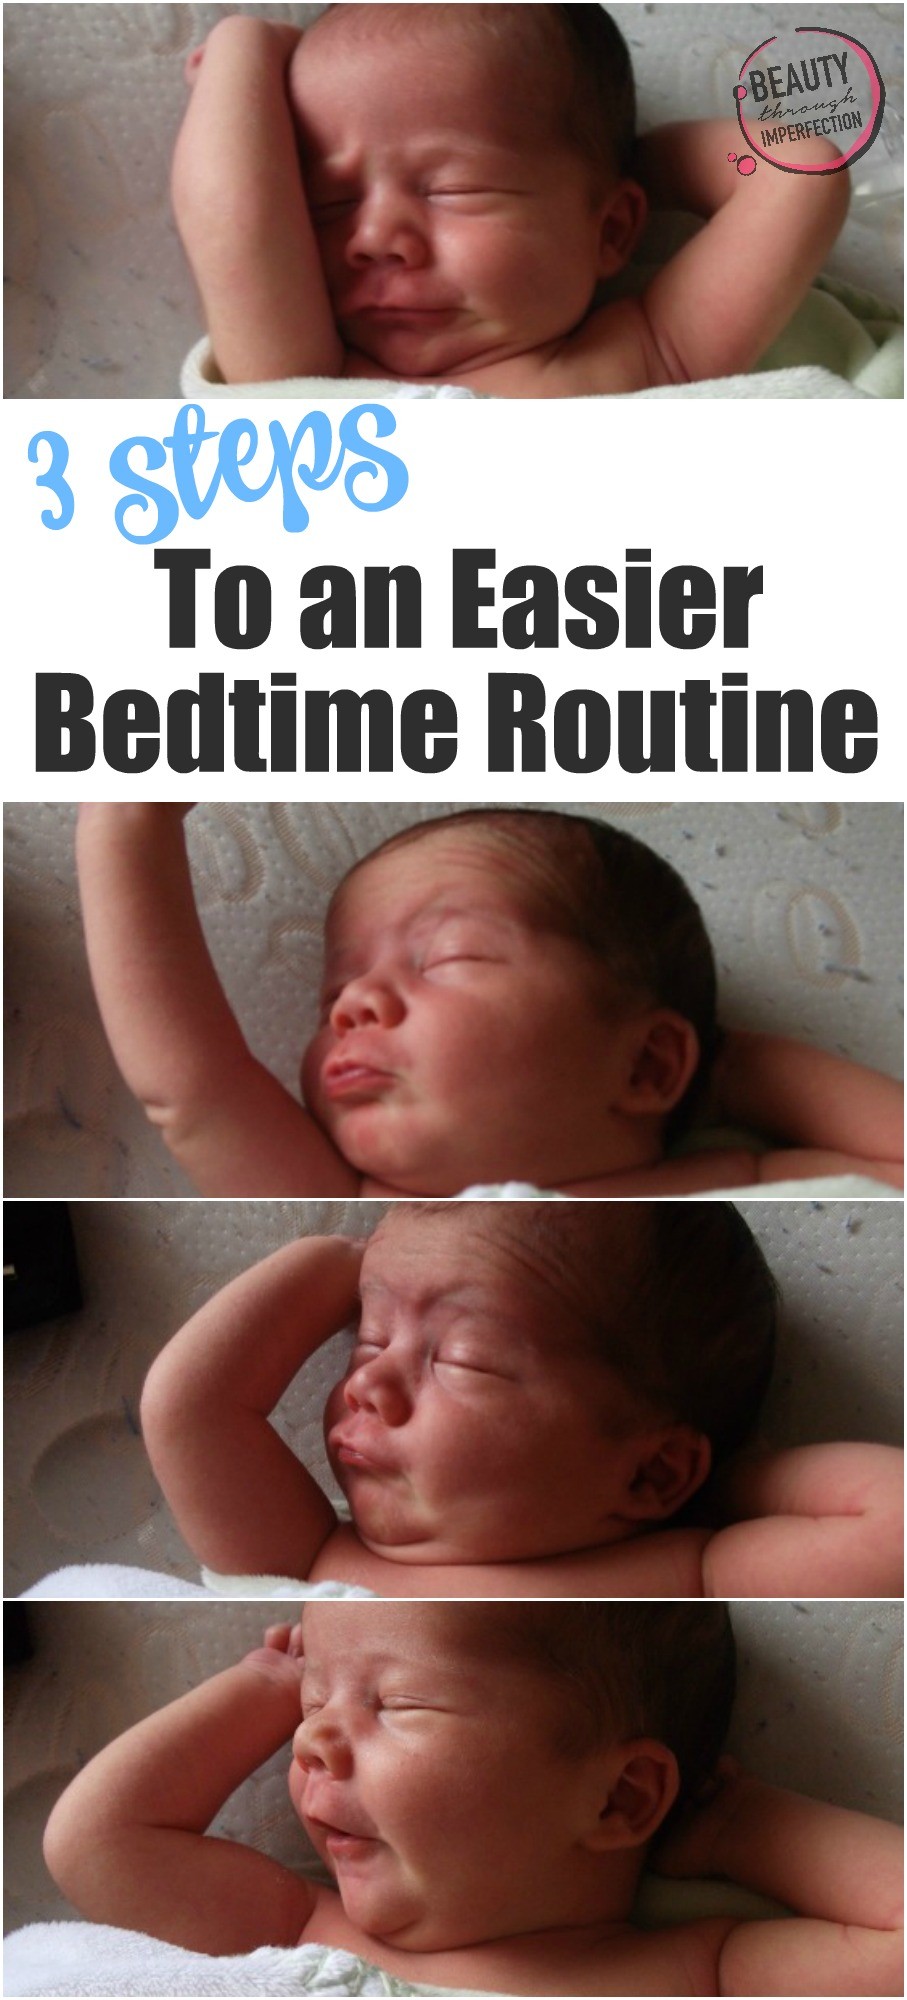 3 steps to an easier bedtime routine